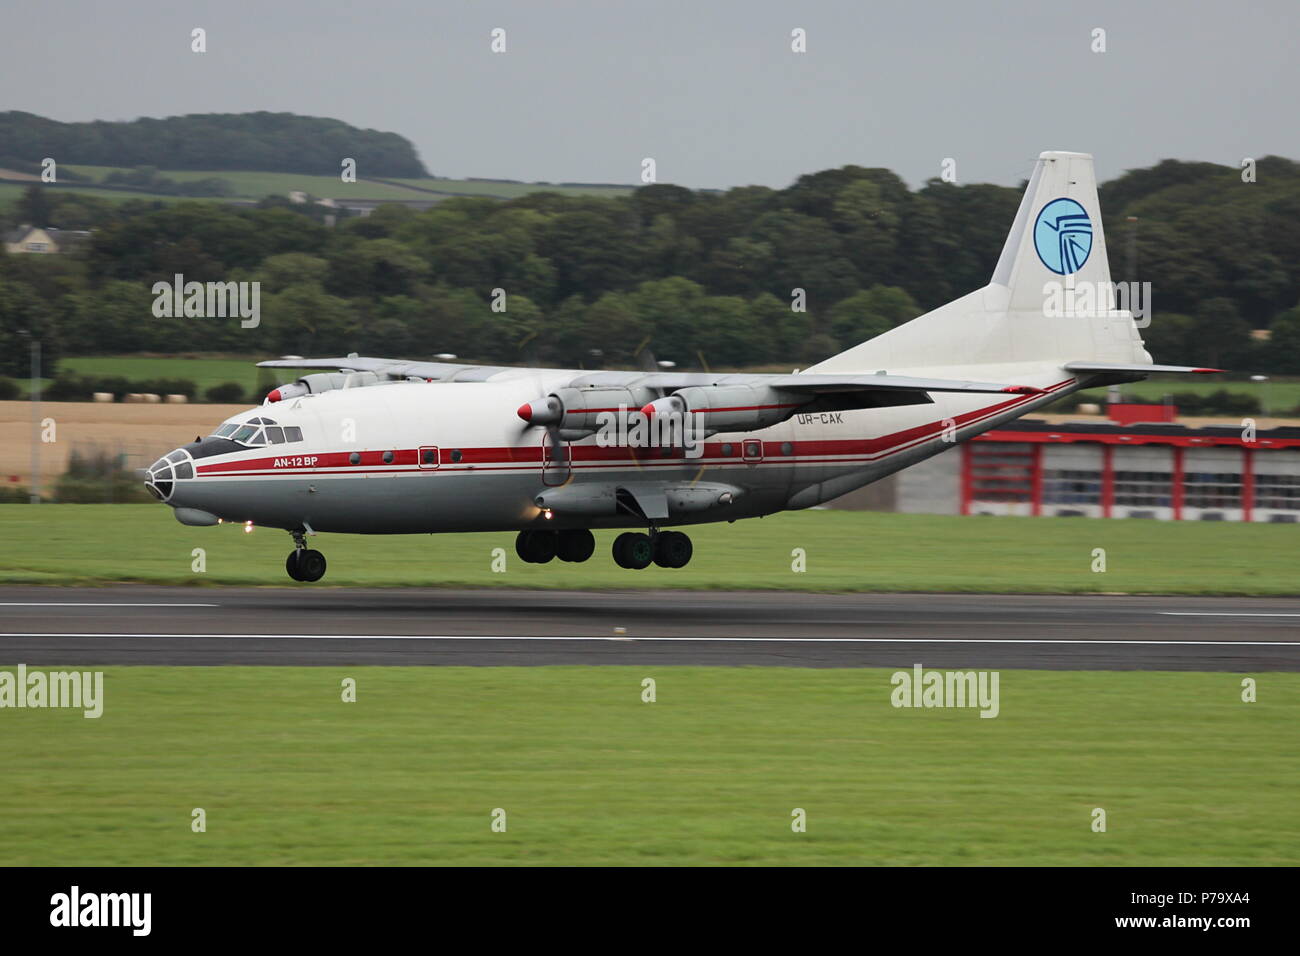 UR-CAK, an Antonov An-12BP cargo aircraft operated by Ukraine Air Alliance, landing nosewheel first at Prestwick Airport in Ayrshire. Stock Photo